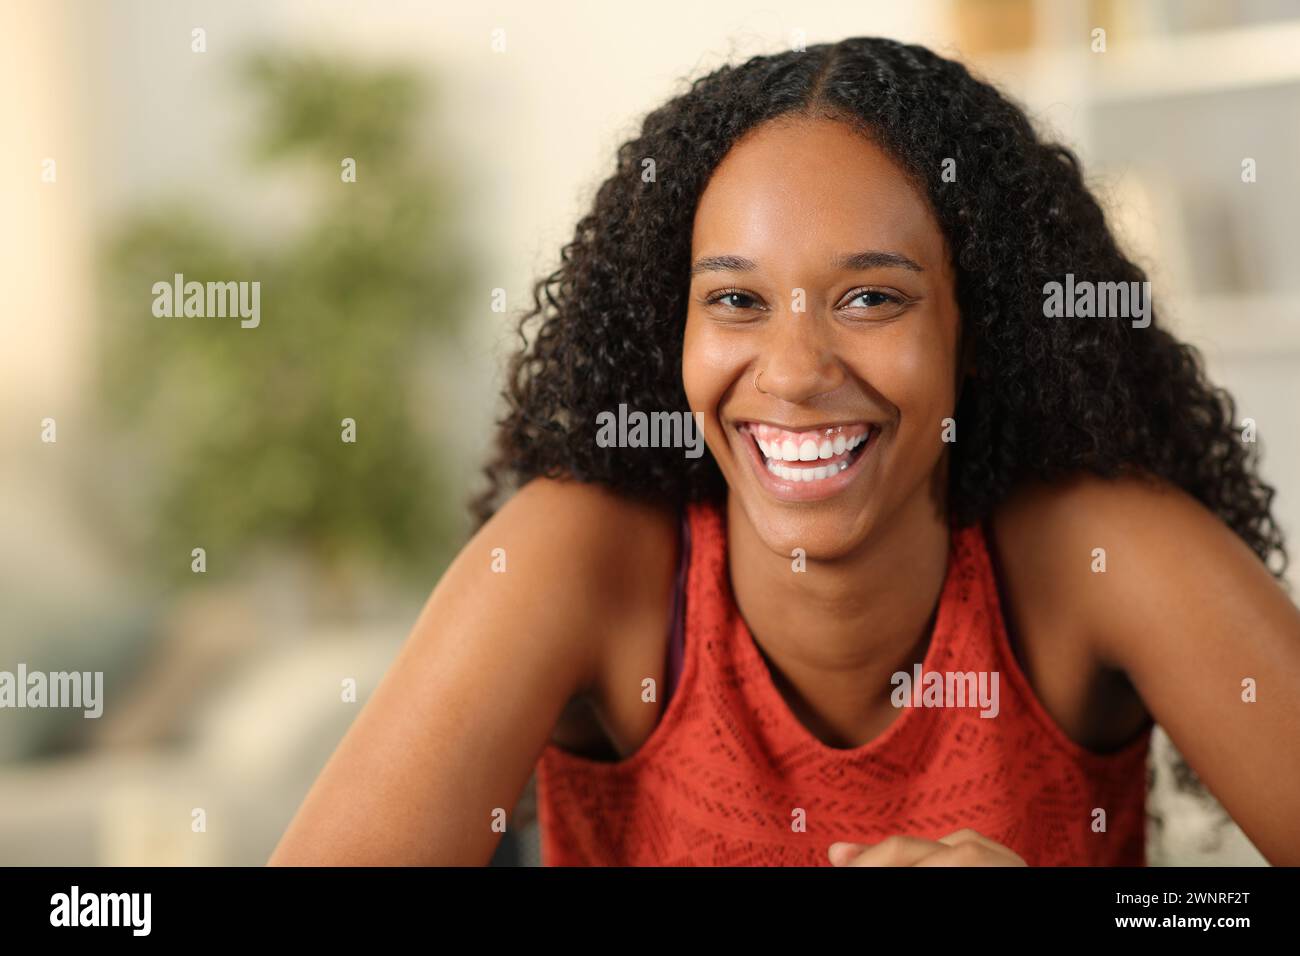 Front view portrait of a happy black woman with perfect smile looking at you Stock Photo